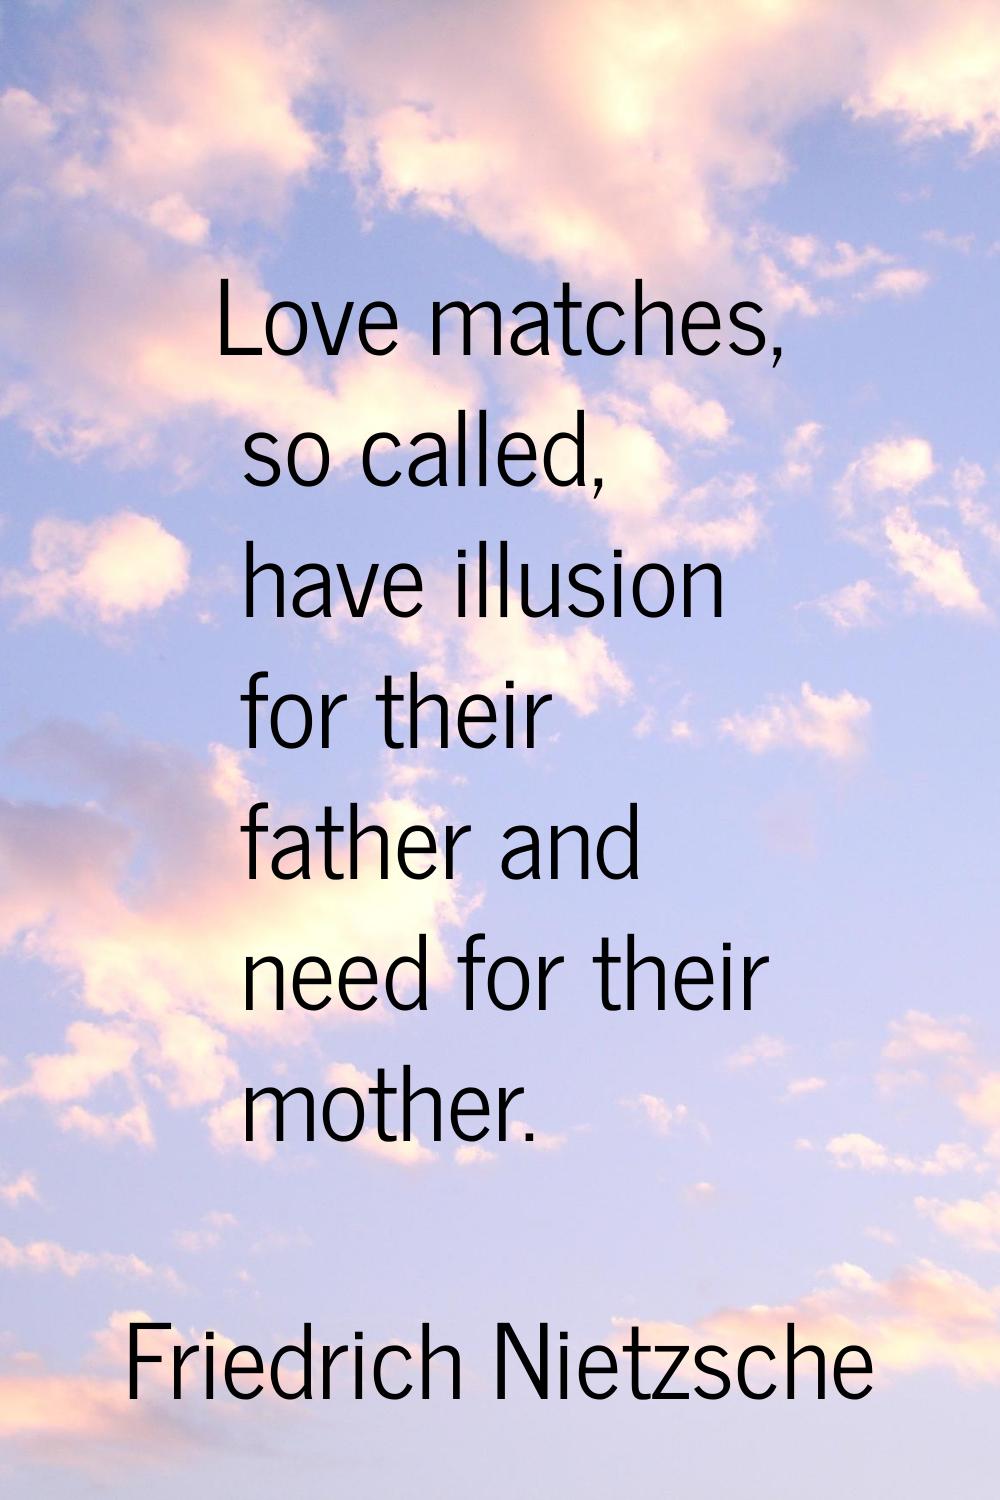 Love matches, so called, have illusion for their father and need for their mother.